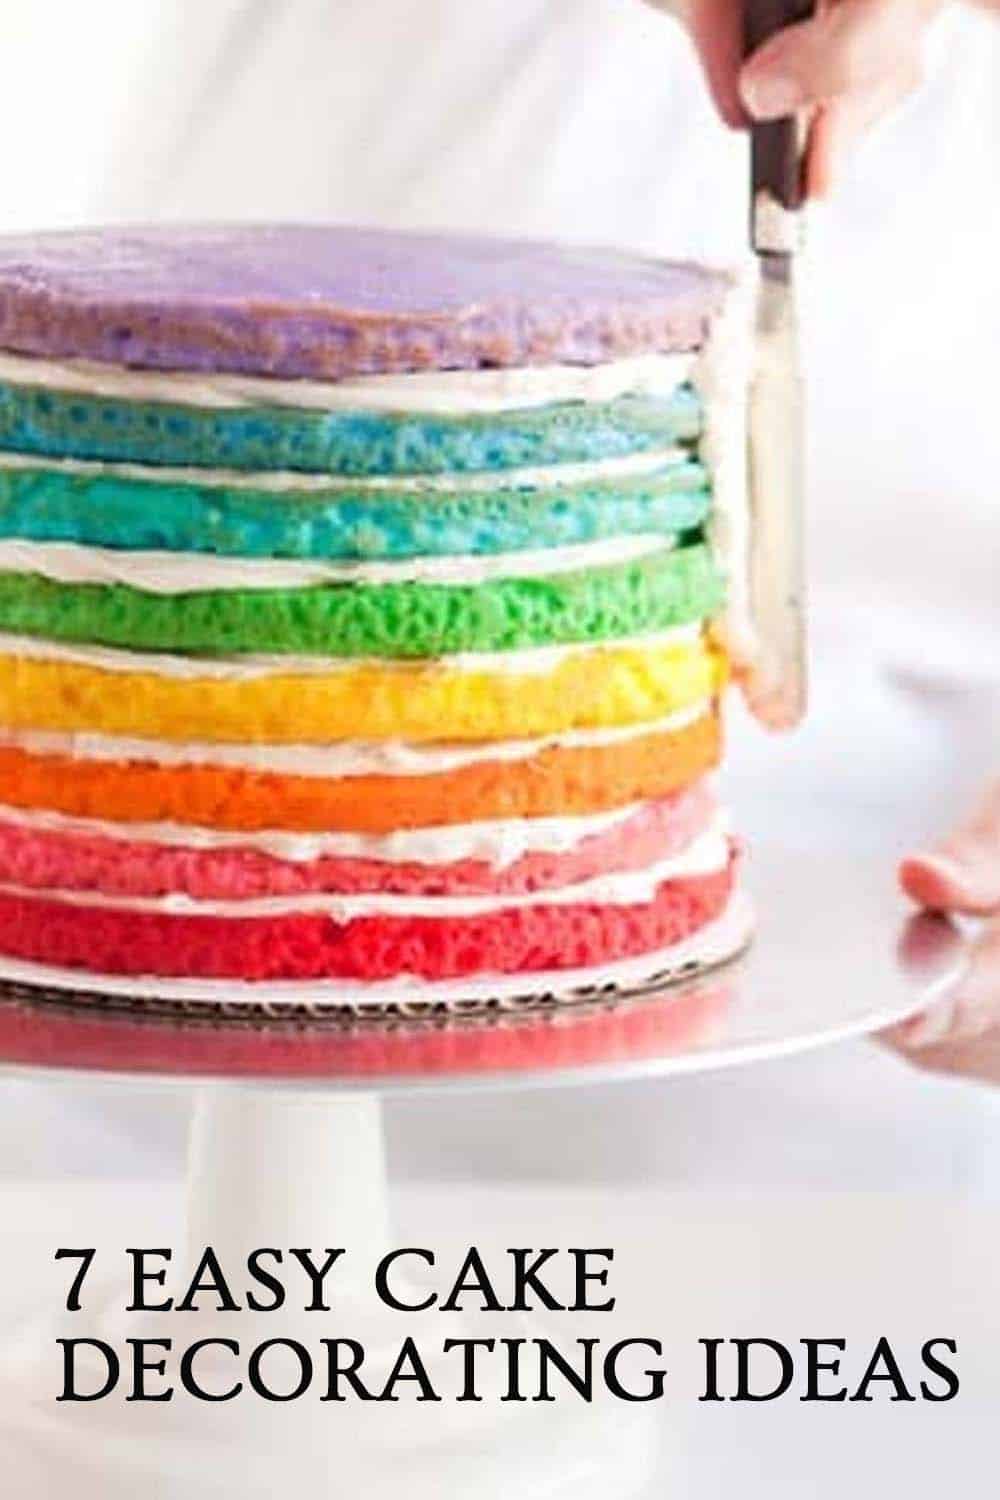 Cake Decorating Ideas That Are Actually Easy | Thoughtfully Simple